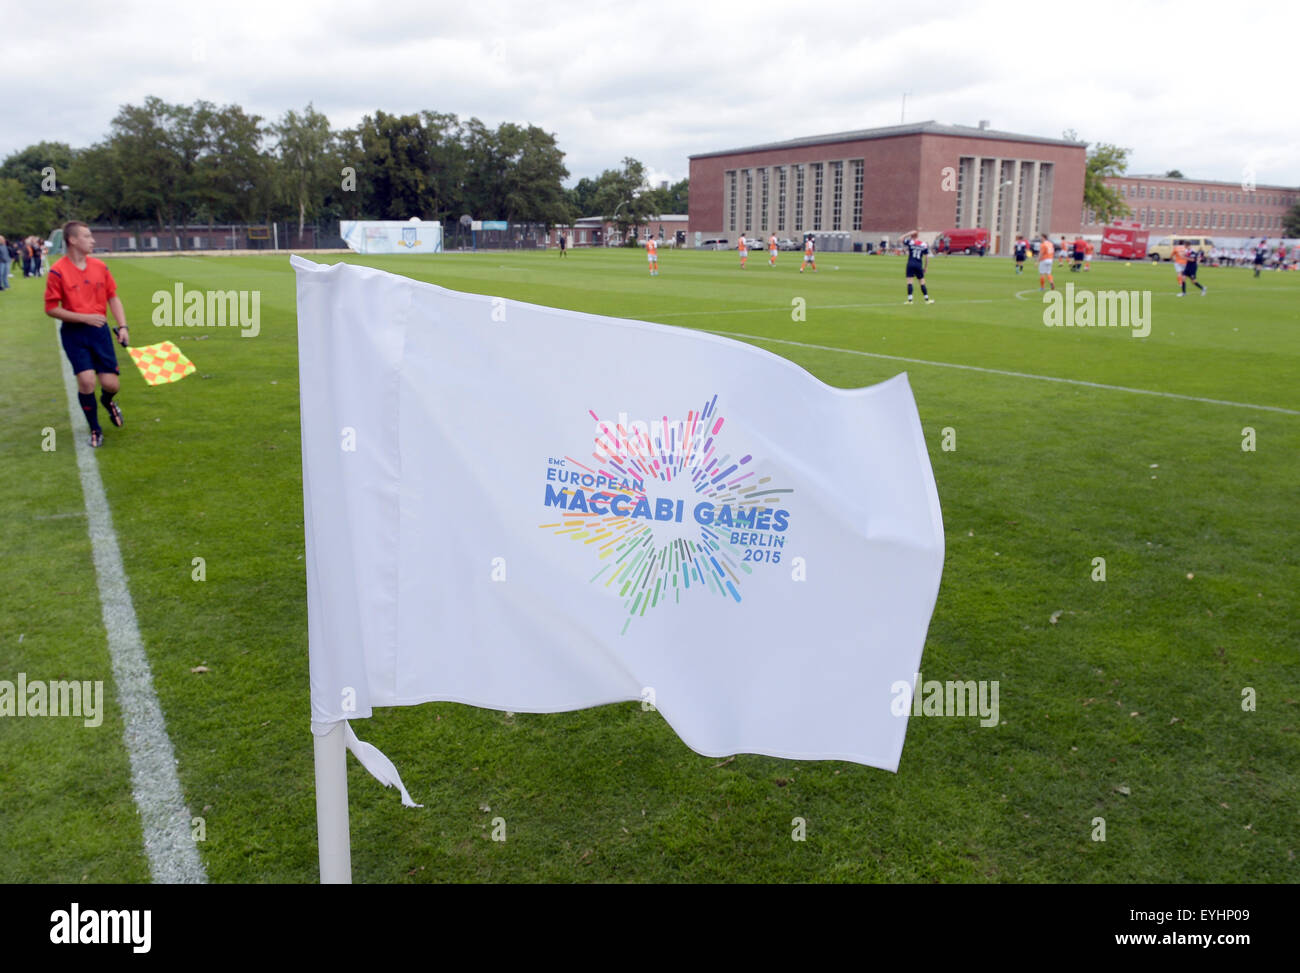 A corner flag waves during a soccer match between the Netherlands and Great Britain of the European Maccabi Games at the Olympic Park in Berlin, Germany, 30 July 2015. Around 2,300 Jewish athletes from 38 countries will compete in the 14th European Maccabi Games held at the Olympic Park in Berlin until 05 August 2015. Seventy years after the holocaust, Germany is hosting the Jewish sports event for the first time. Photo: RAINER JENSEN/dpa Stock Photo